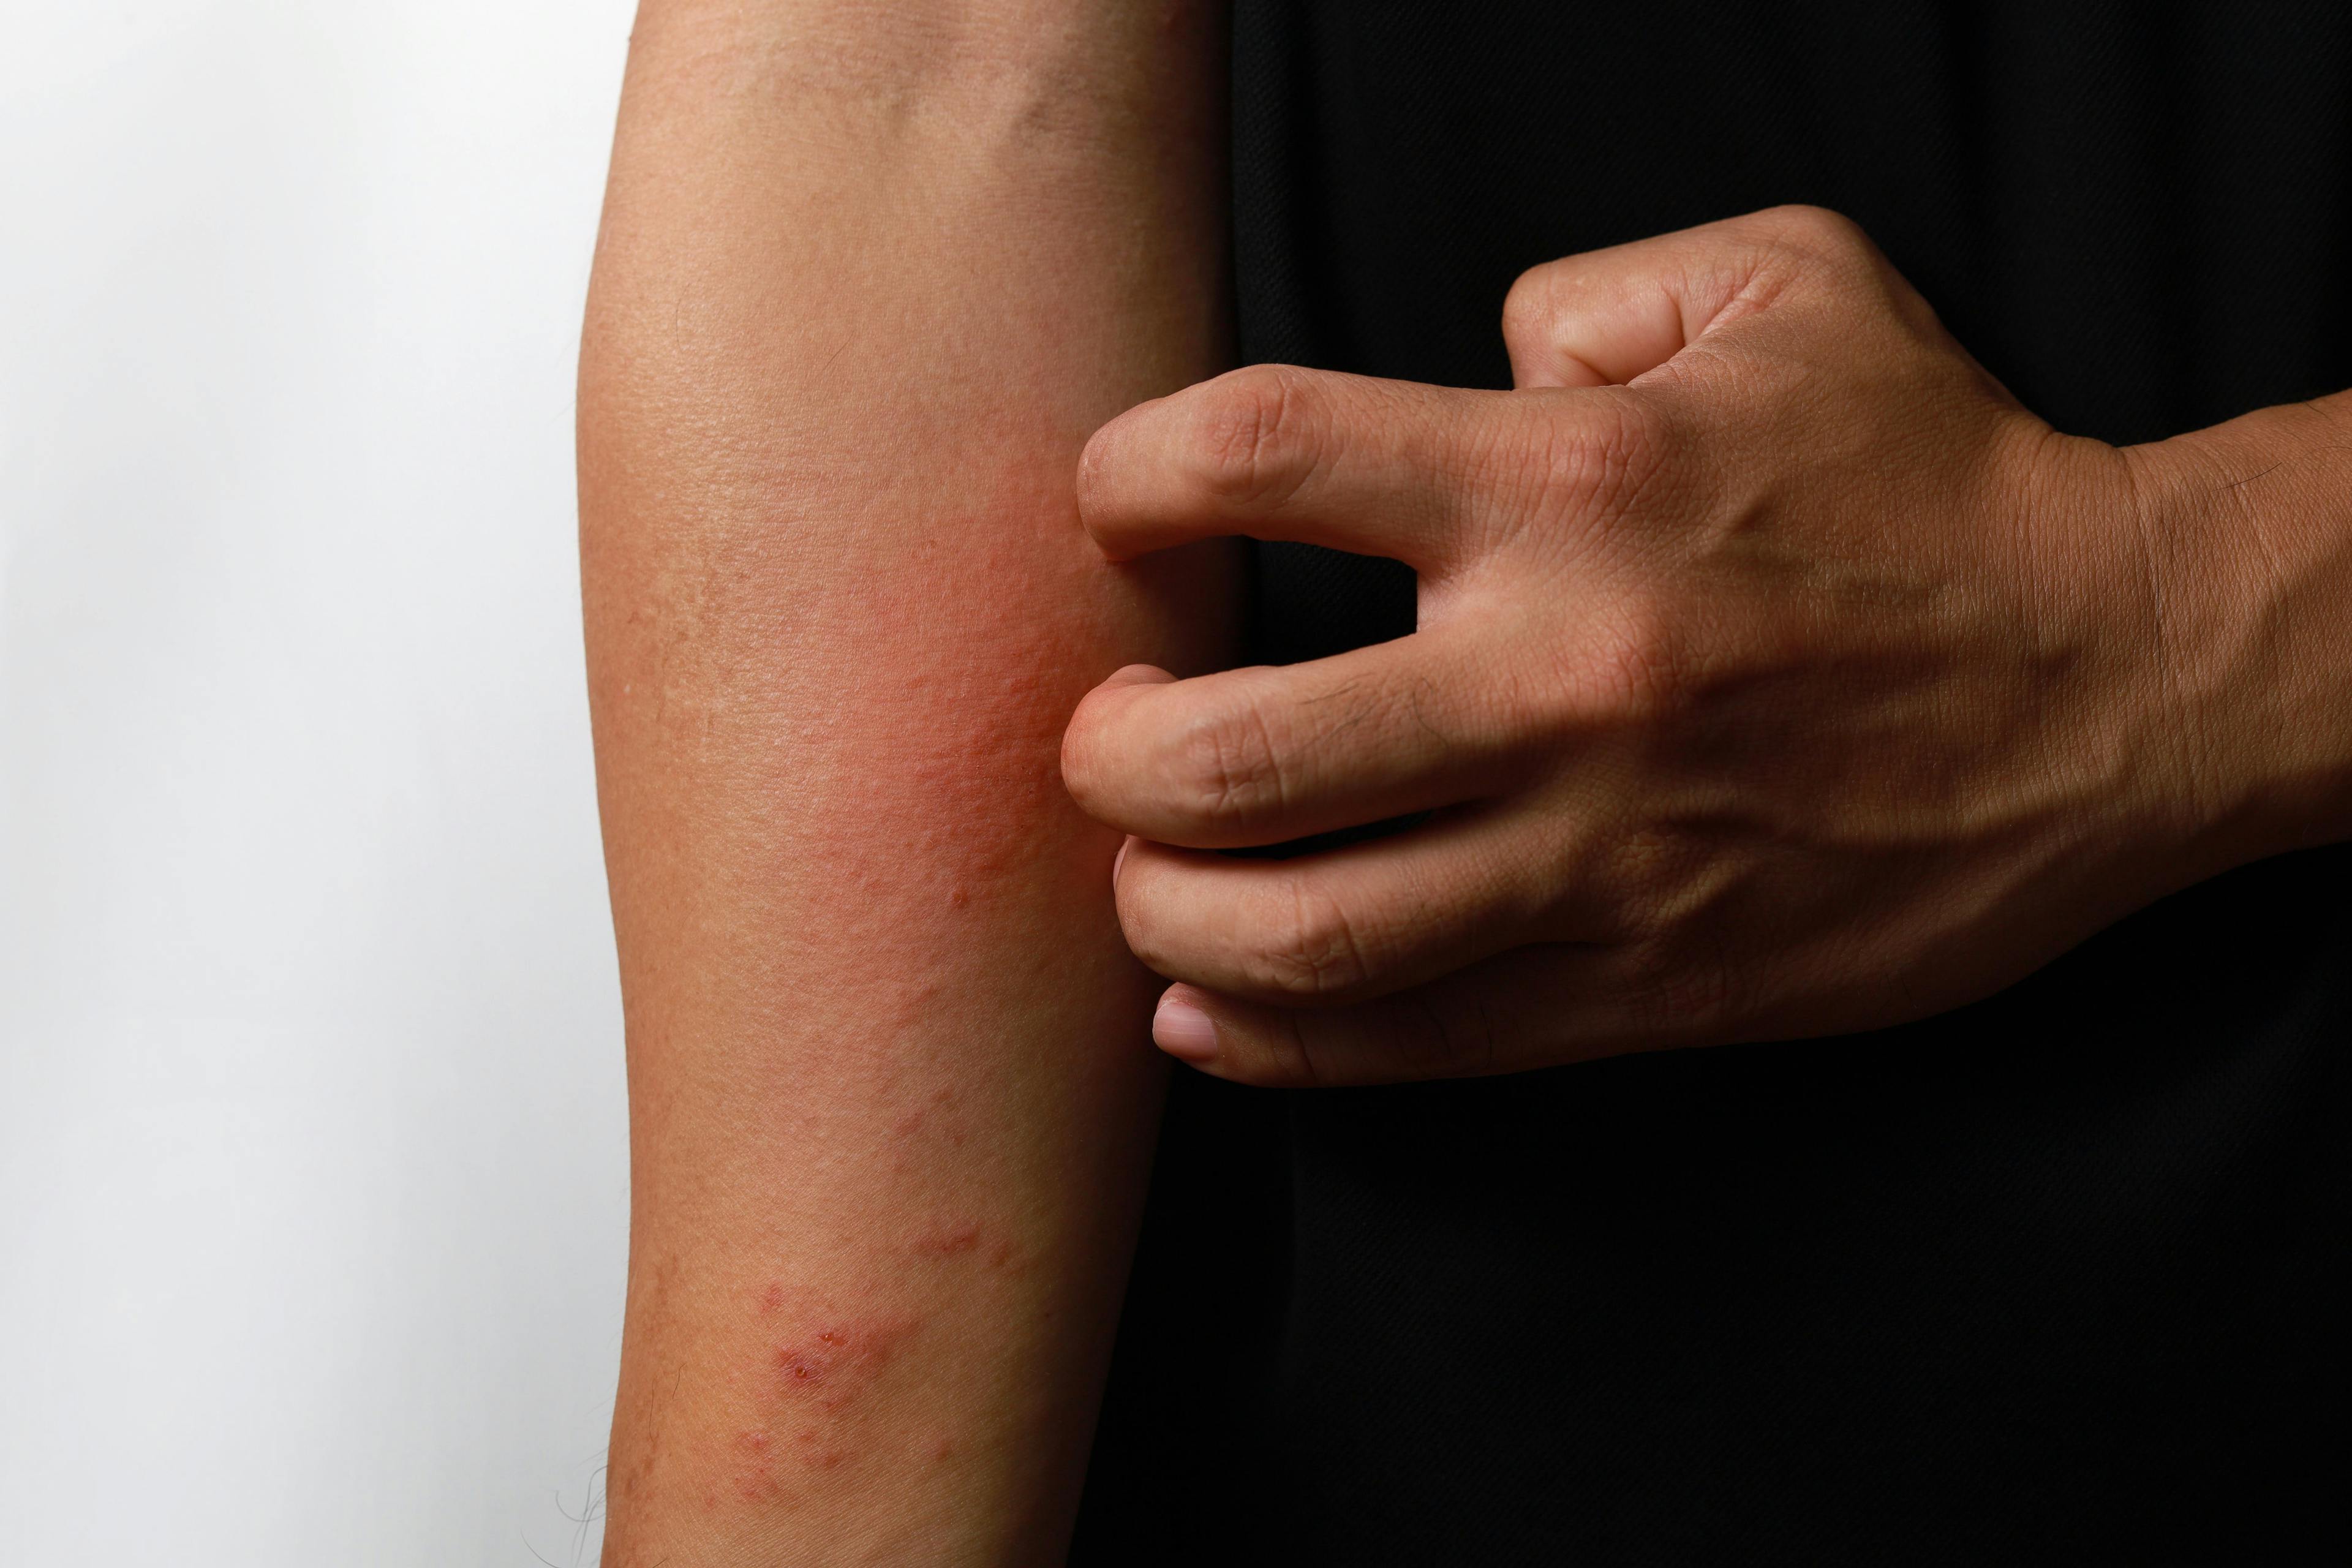 Adult scratching atopic dermatitis on arm | Image Credit: ltyuan - stock.adobe.com